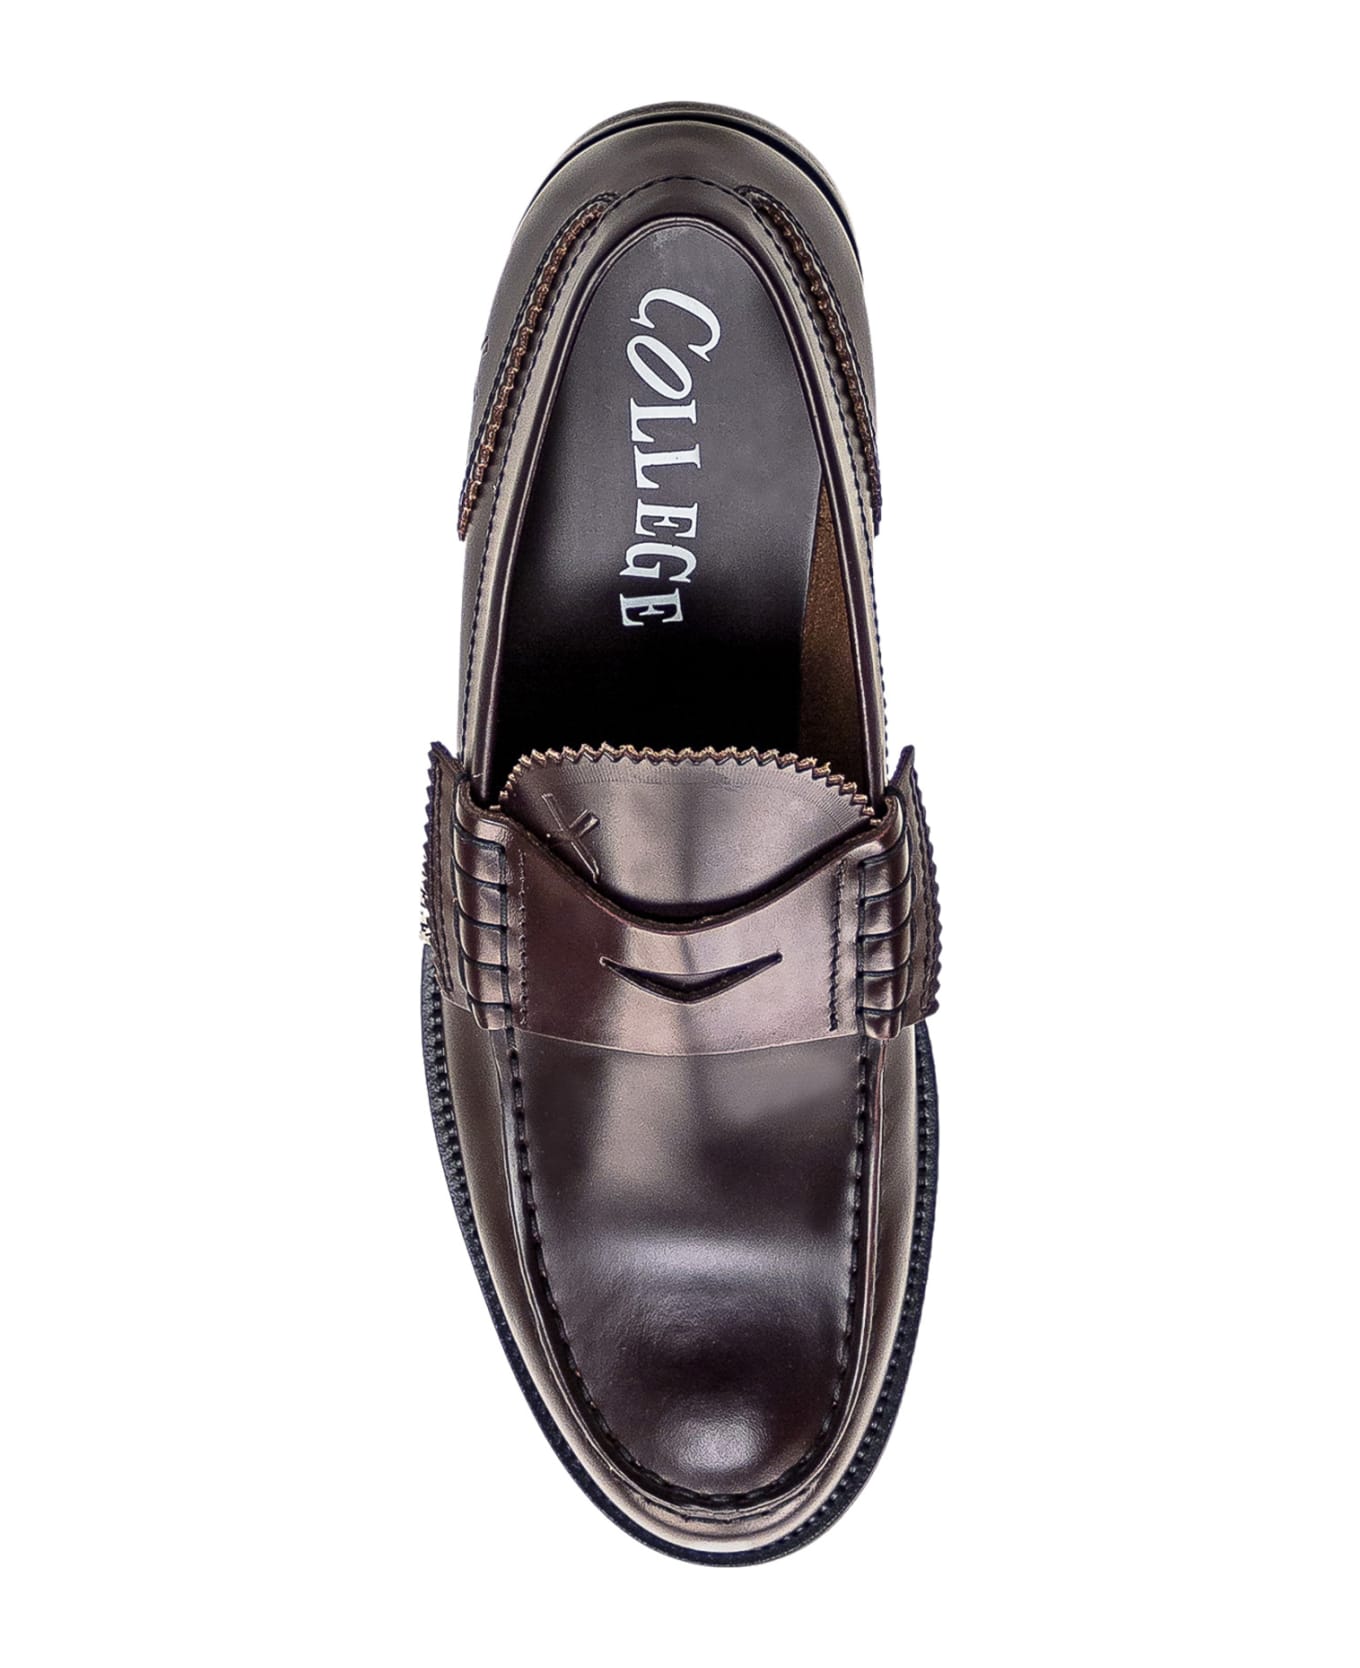 College Leather Loafer - ANTICK CORDOBAN